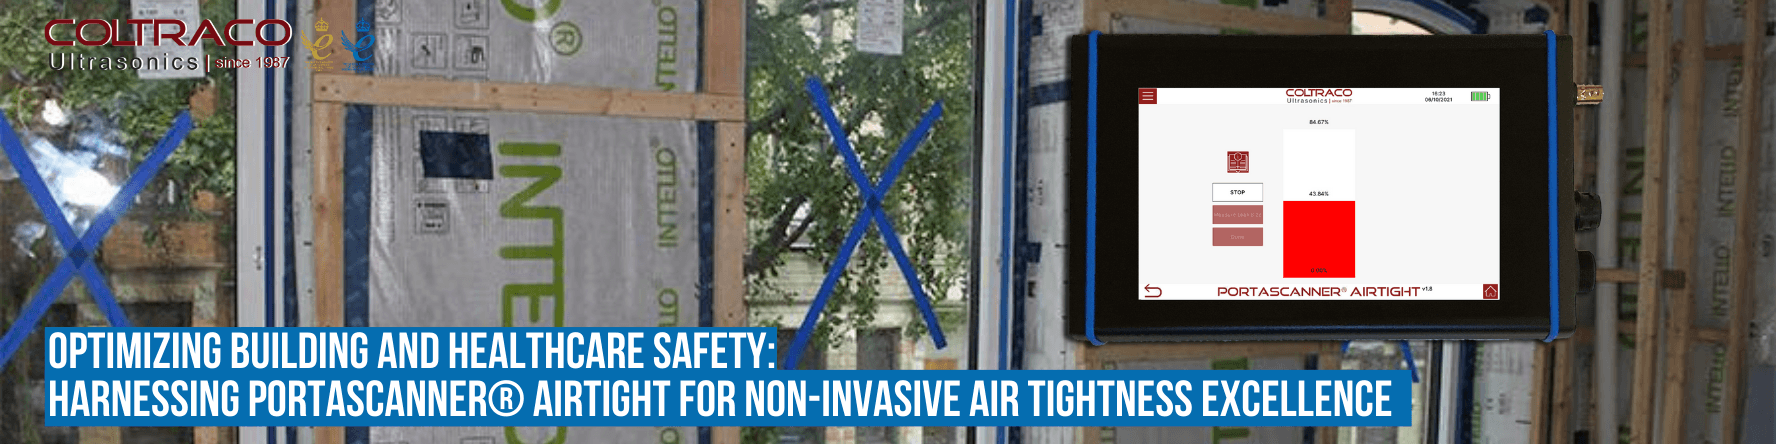 Optimizing Building and Healthcare Safety: Harnessing Portascanner® AIRTIGHT for Non-Invasive Air Tightness Excellence.